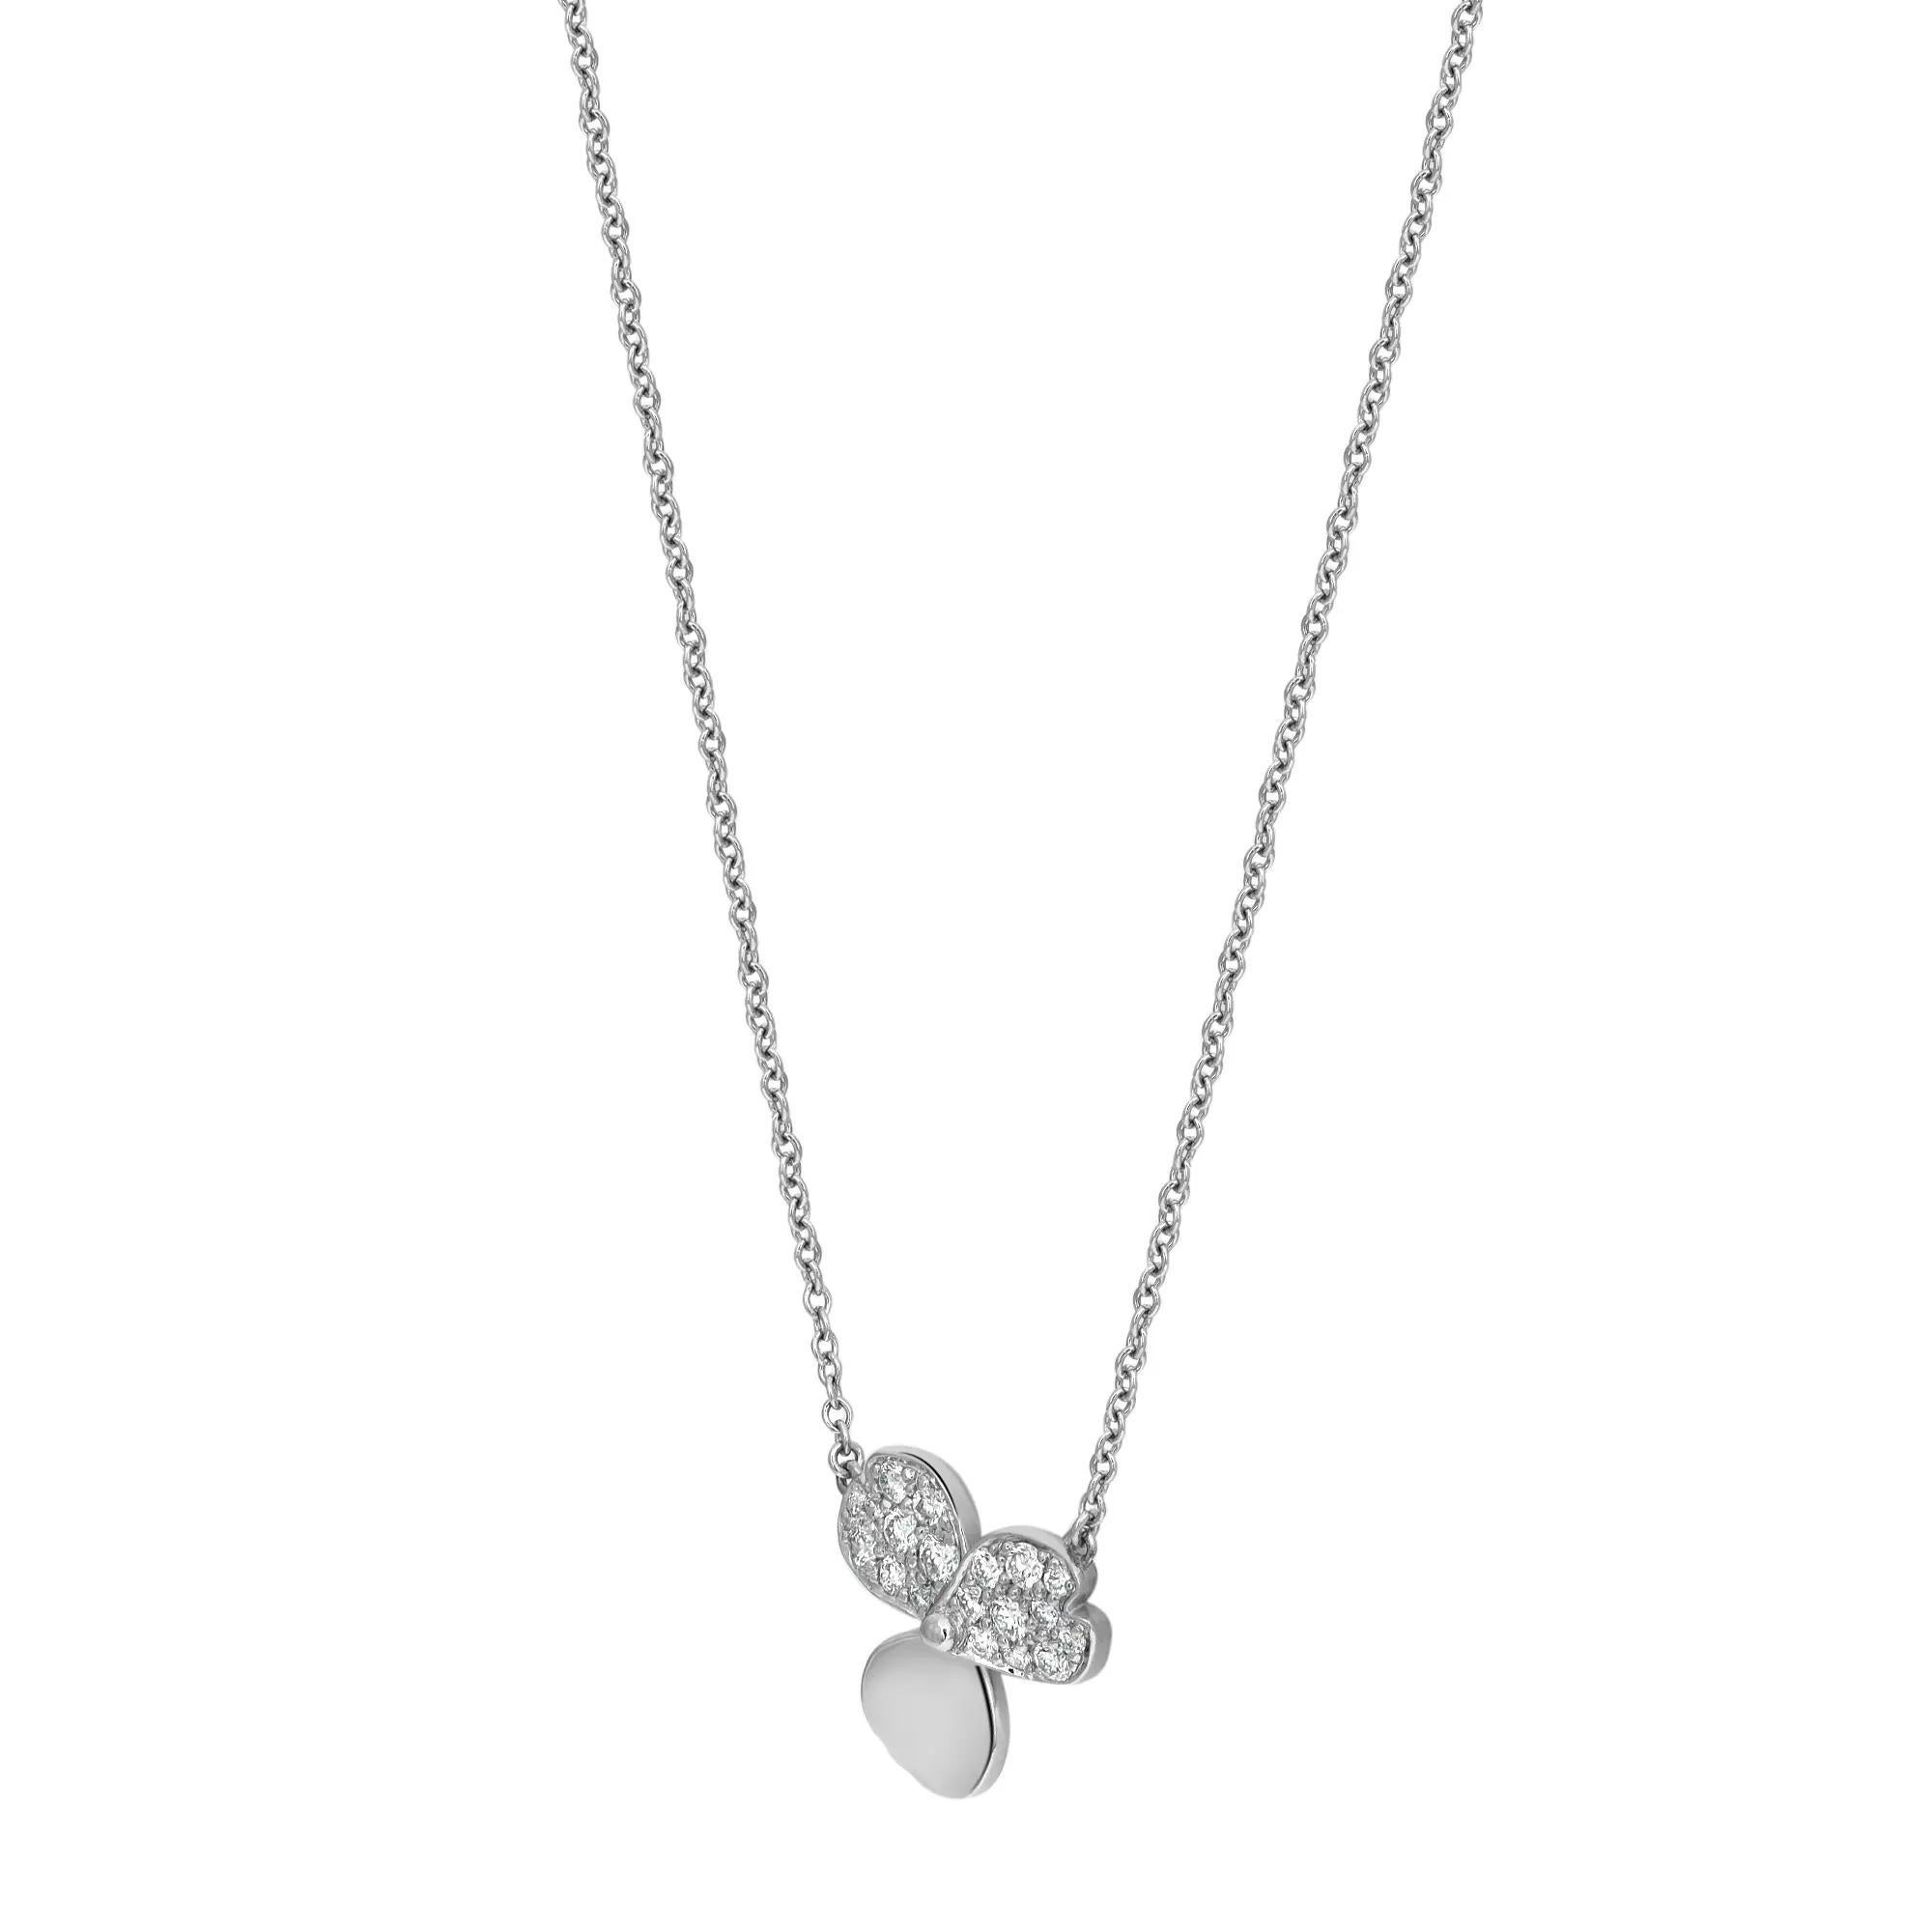 This fabulous Tiffany & Co. Paper Flowers Diamond Pendant Necklace is a perfect accent to your everyday and evening look and gives a touch of chic to any ensemble you pair it with. Crafted in lustrous platinum. It features a flower pendant studded